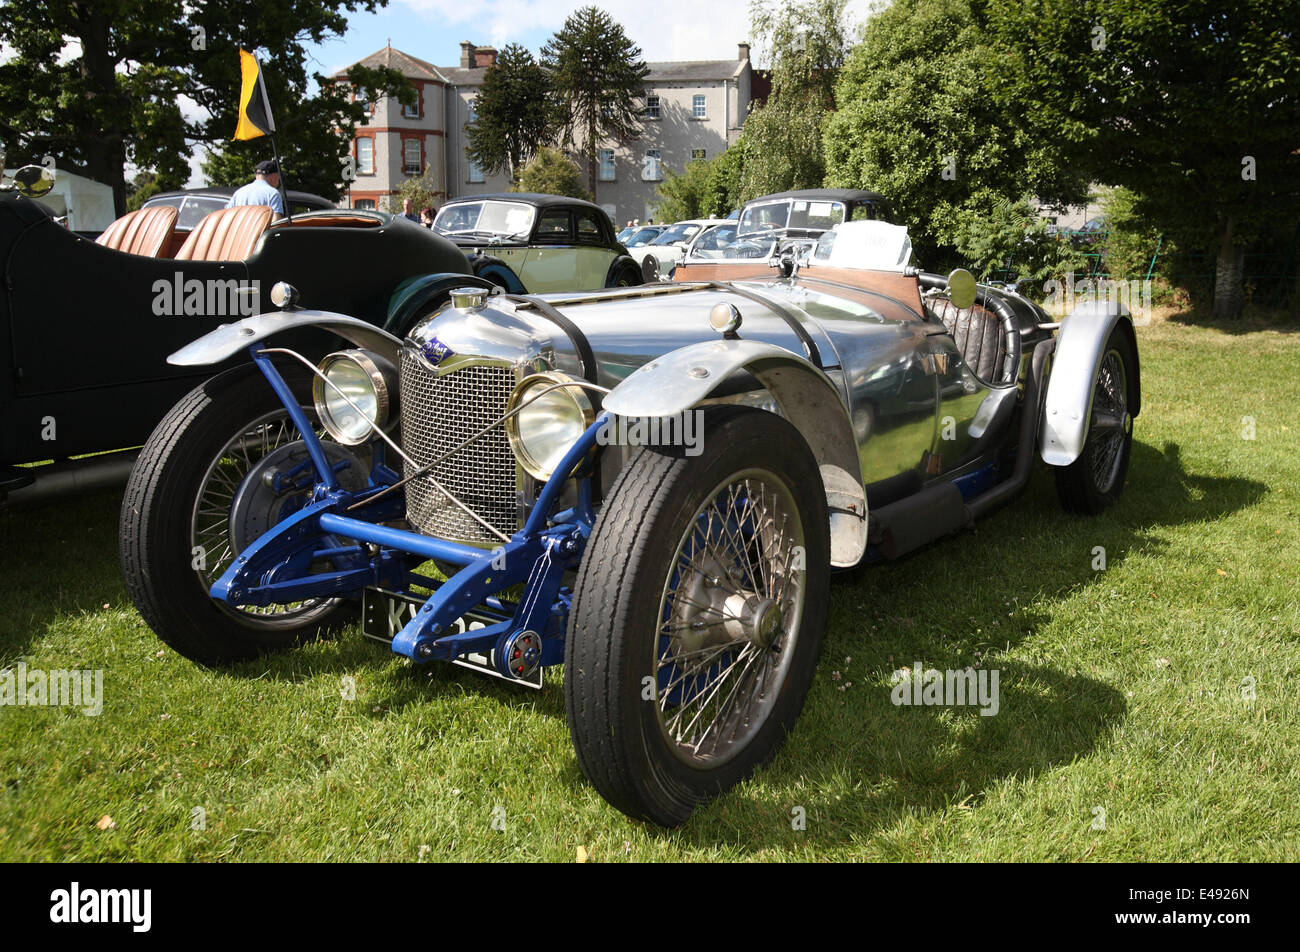 Dublin, Ireland. 6th July, 2014. Terenure Classic and Vintage car show Dublin 2014, featuring a strong turn out of Riley Cars from throughout the years. Terenure is one of Ireland's largest gathering of classic and vintage cars, with this being its 23rd year running. Credit:  Ian Shipley/Alamy Live News Stock Photo